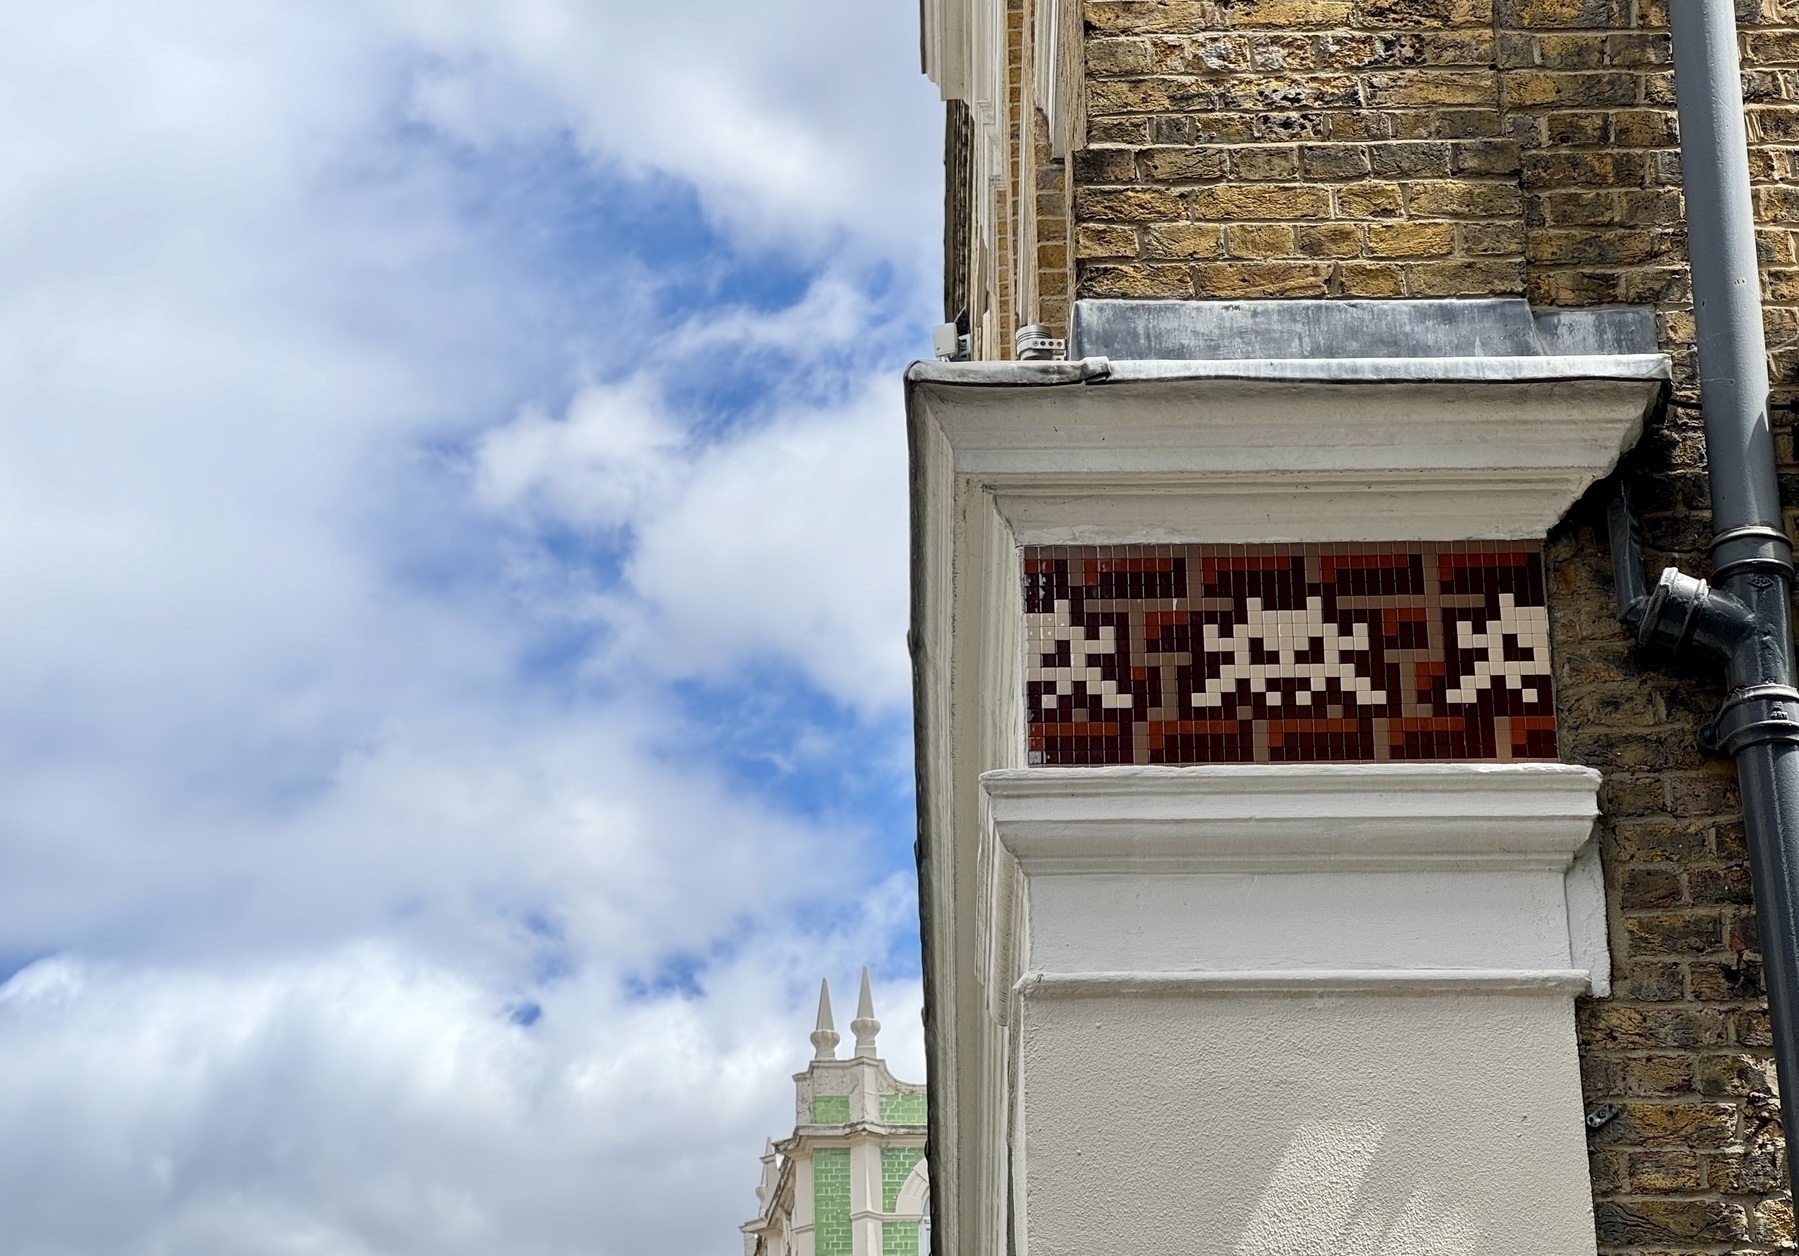 Tiled space invaders hiding on a wall.